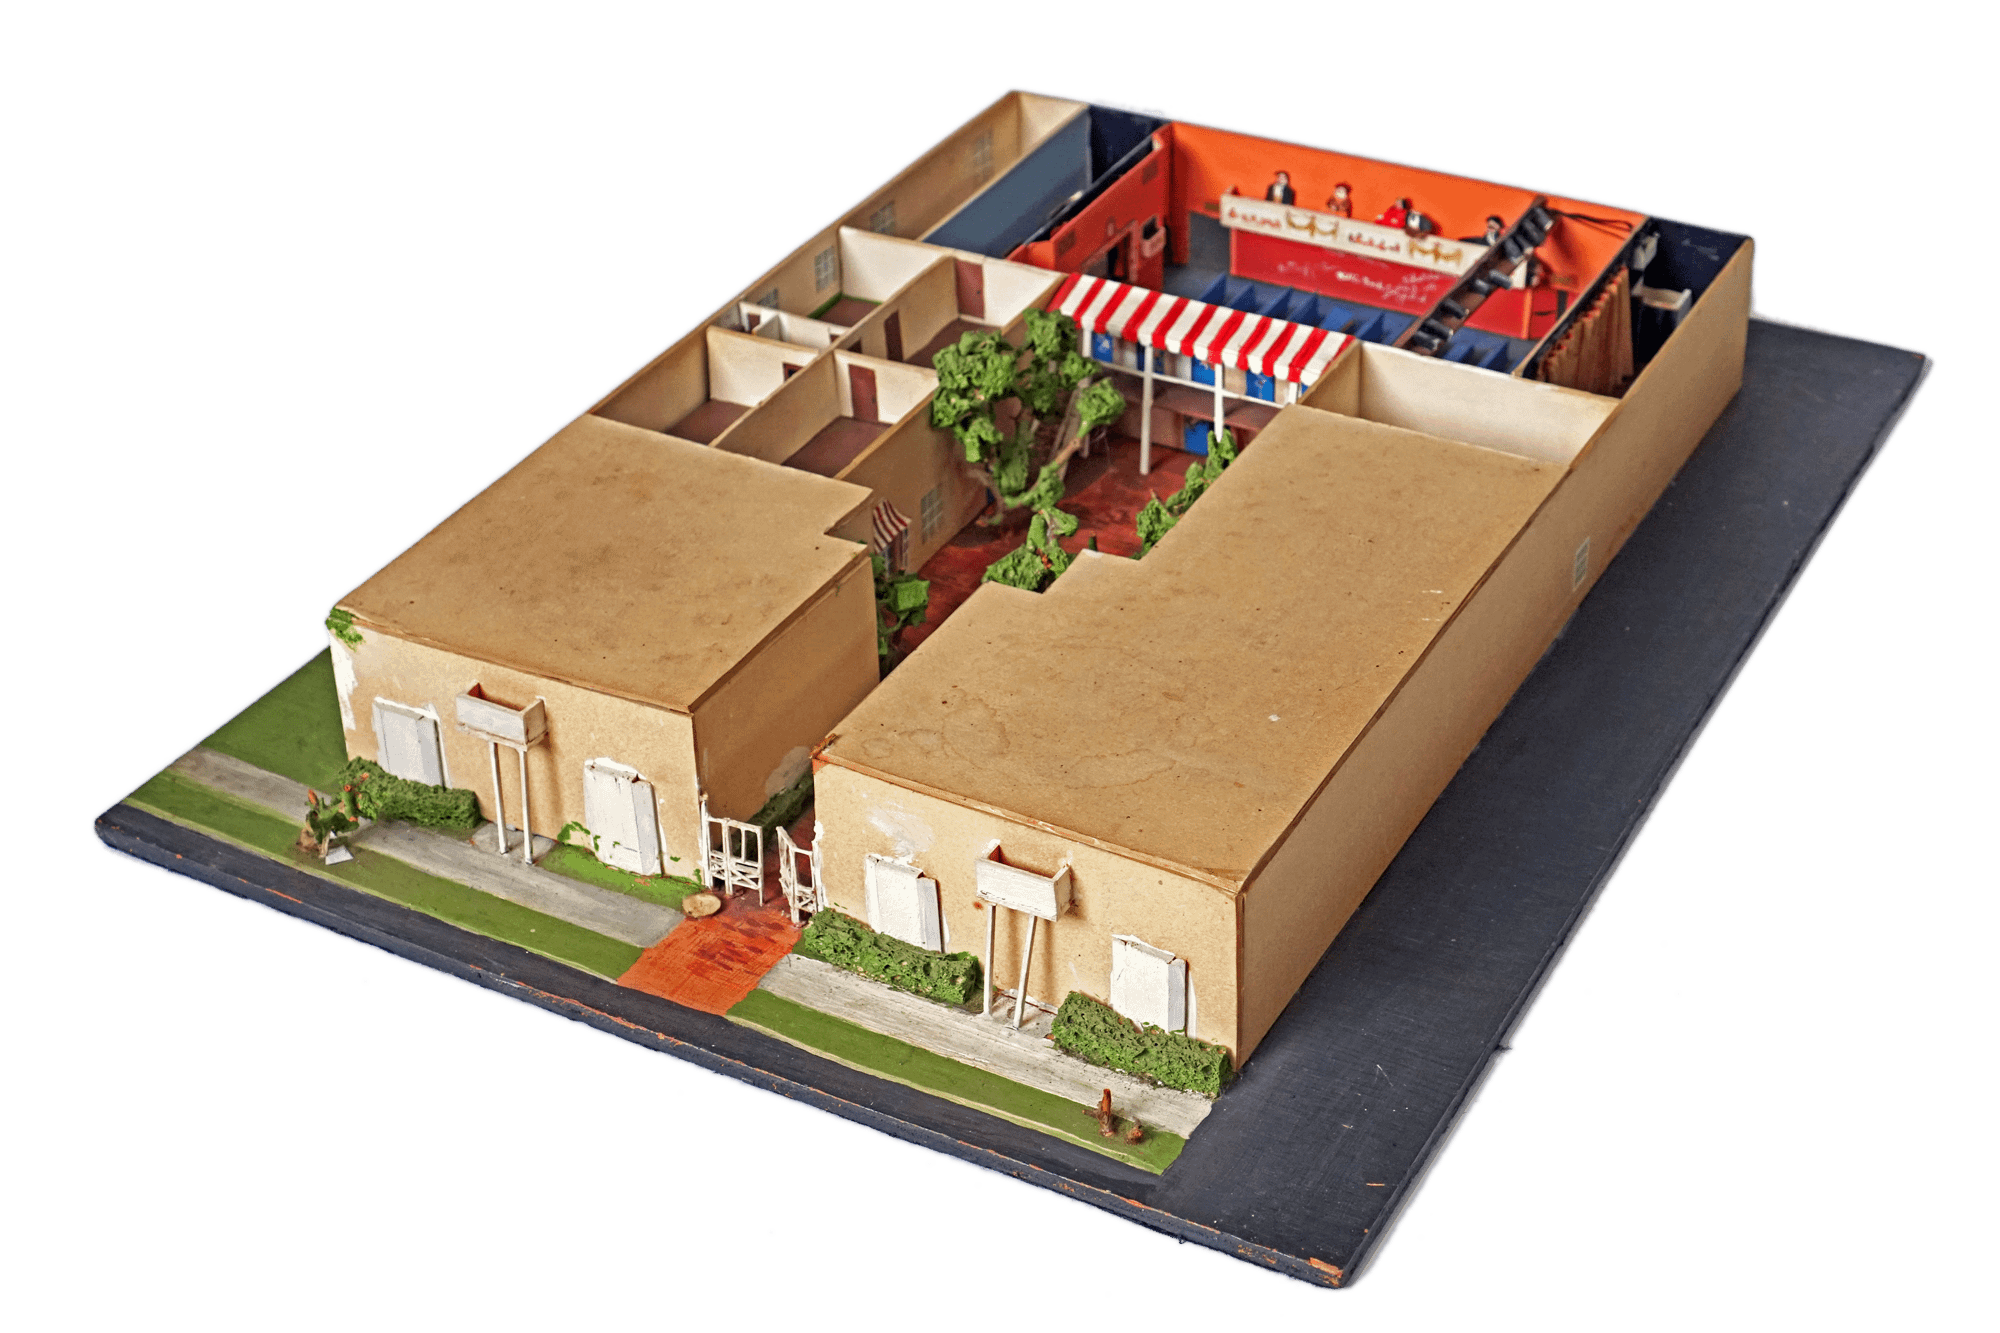 Cardboard model of the Turnabout Theatre on La Cienega